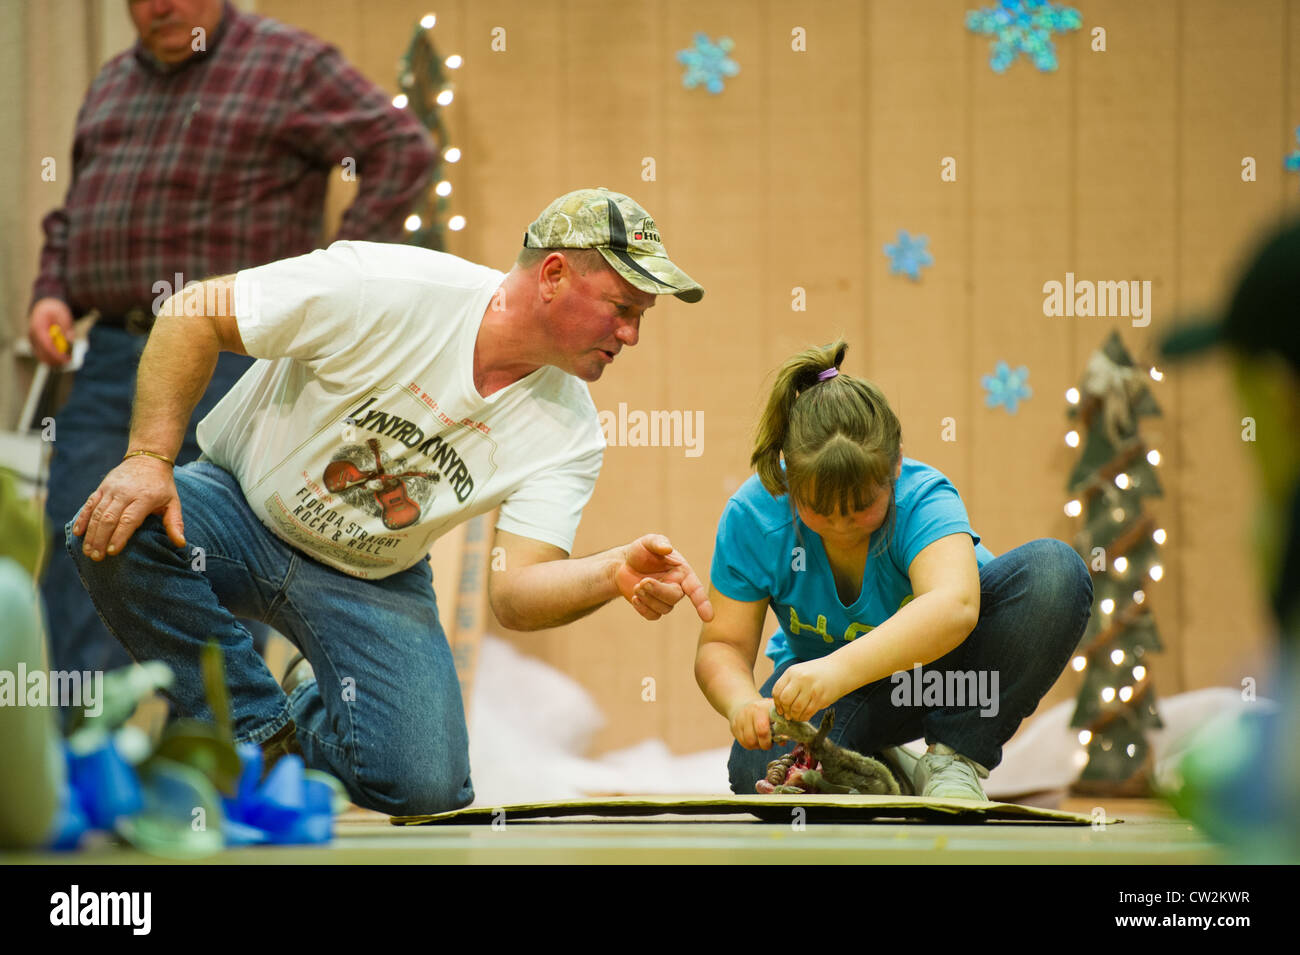 Father coaching daughter in skinning a muskrat at the National Outdoor Show and World Muskrat Skinning Championship Stock Photo